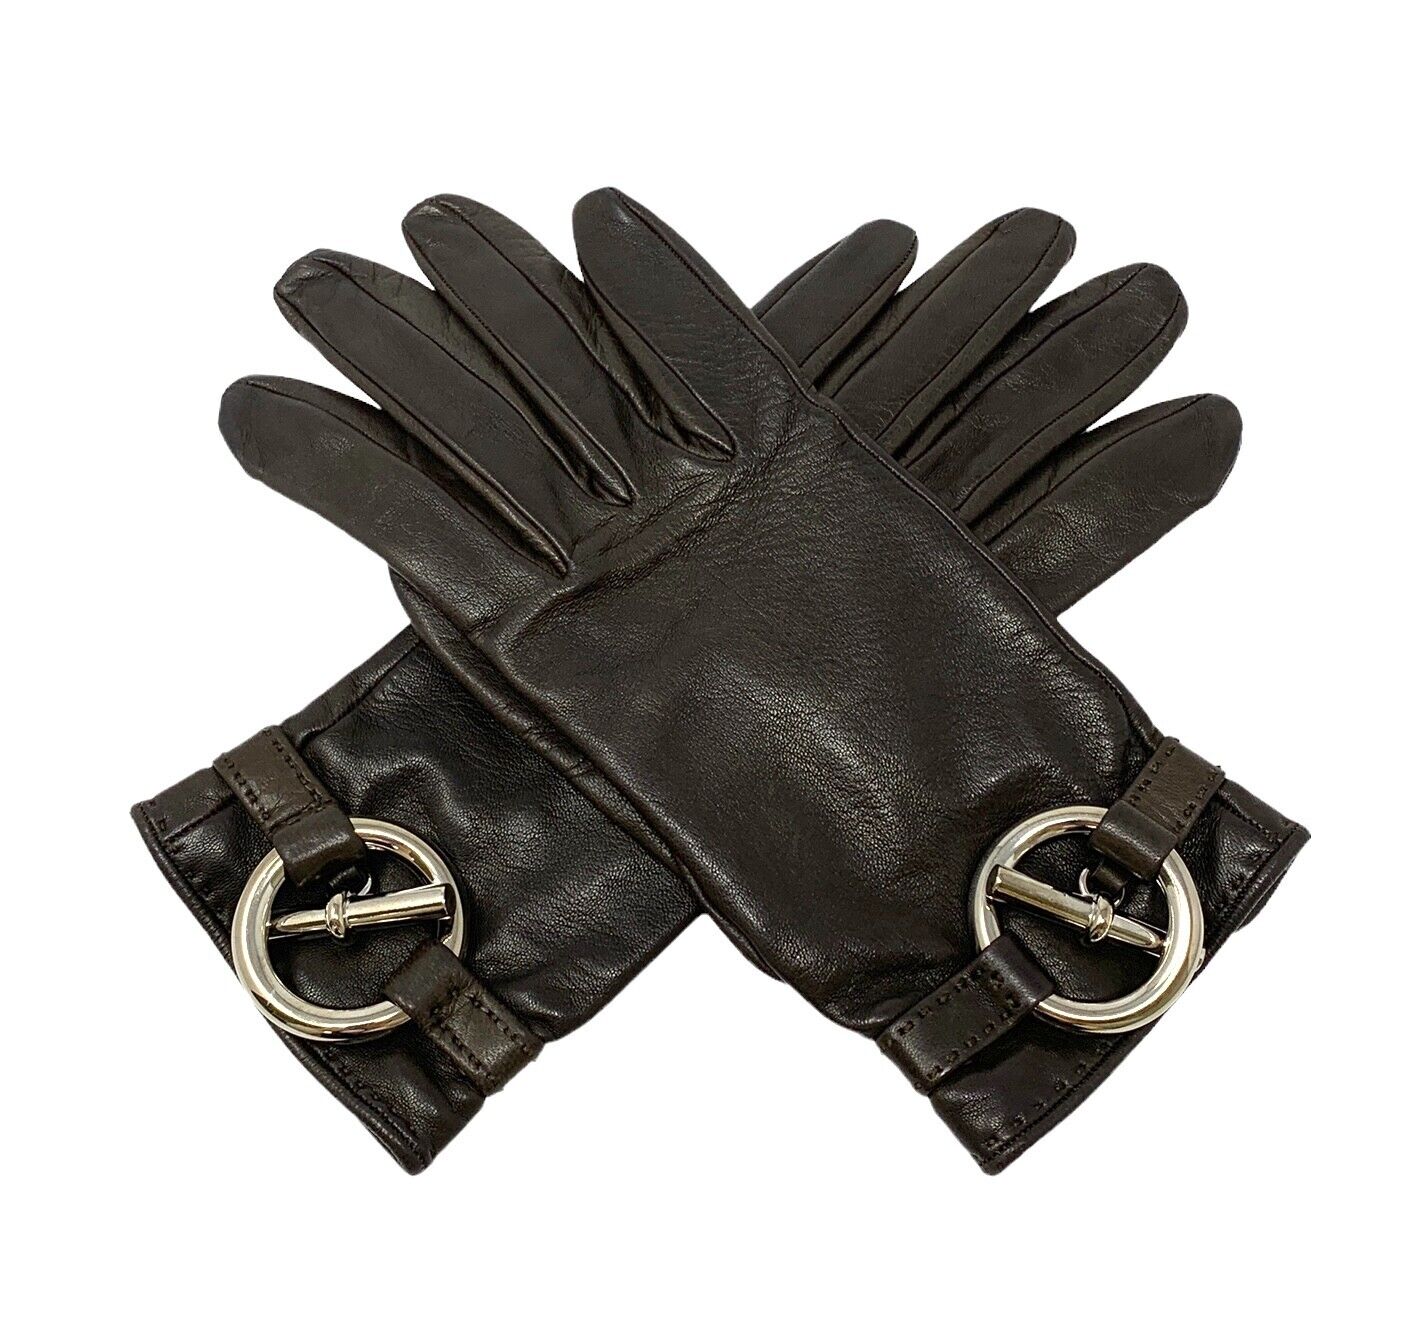 HERMES Vintage Leather Glove #6.5 Fashion Winter Accessory Brown Silver Rank AB